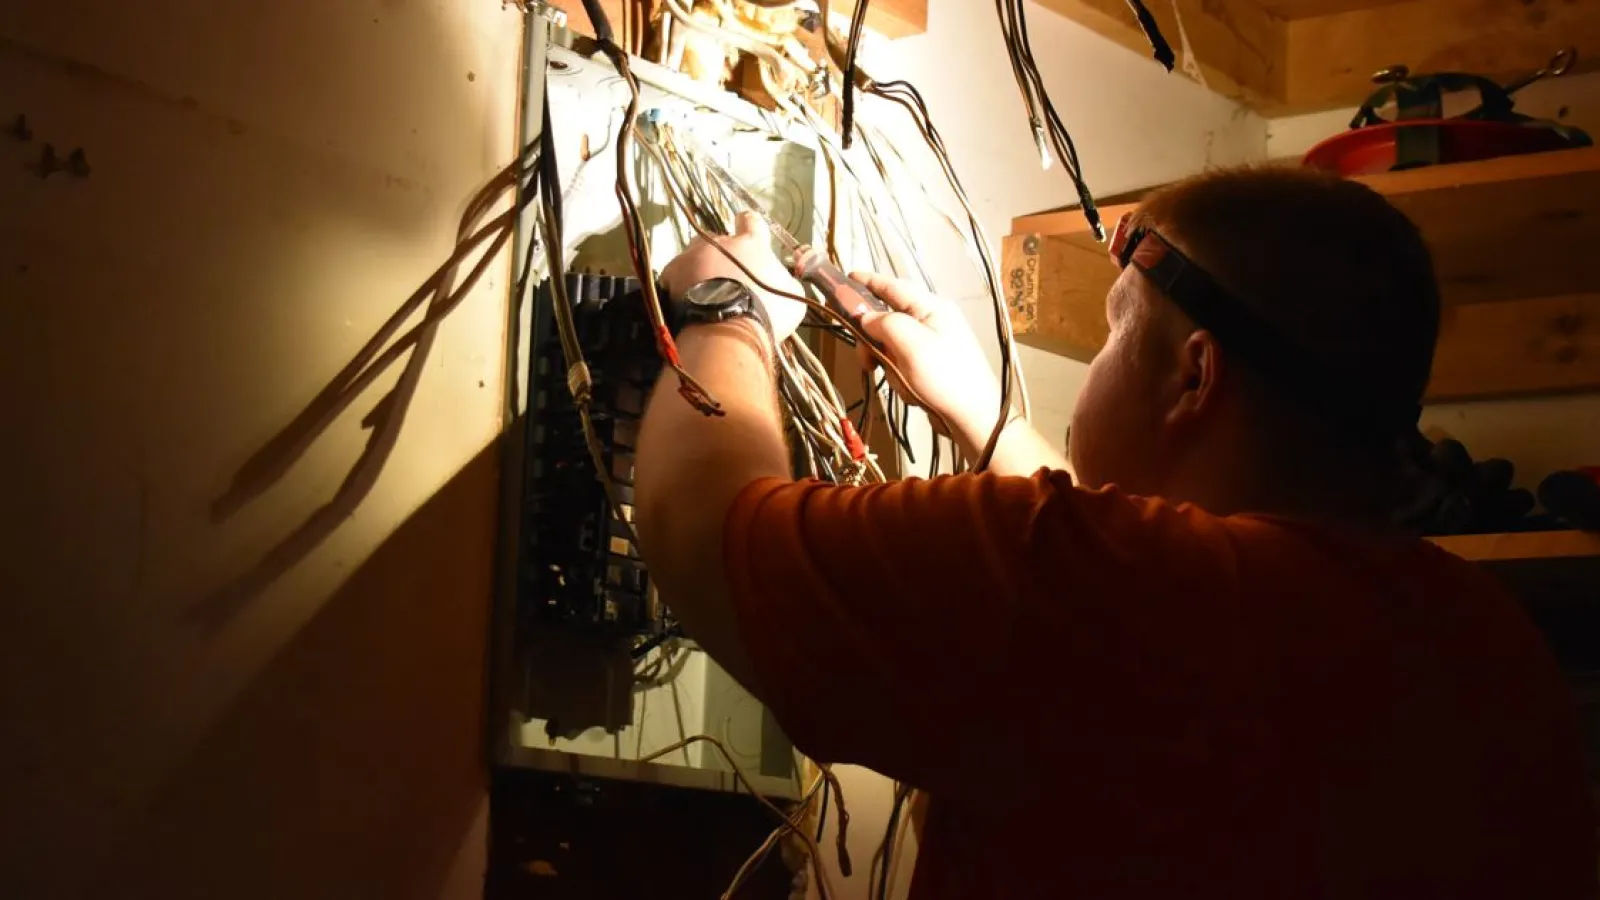 Estes Services Electrician is changing an Electrical Panel in Atlanta, Georgia